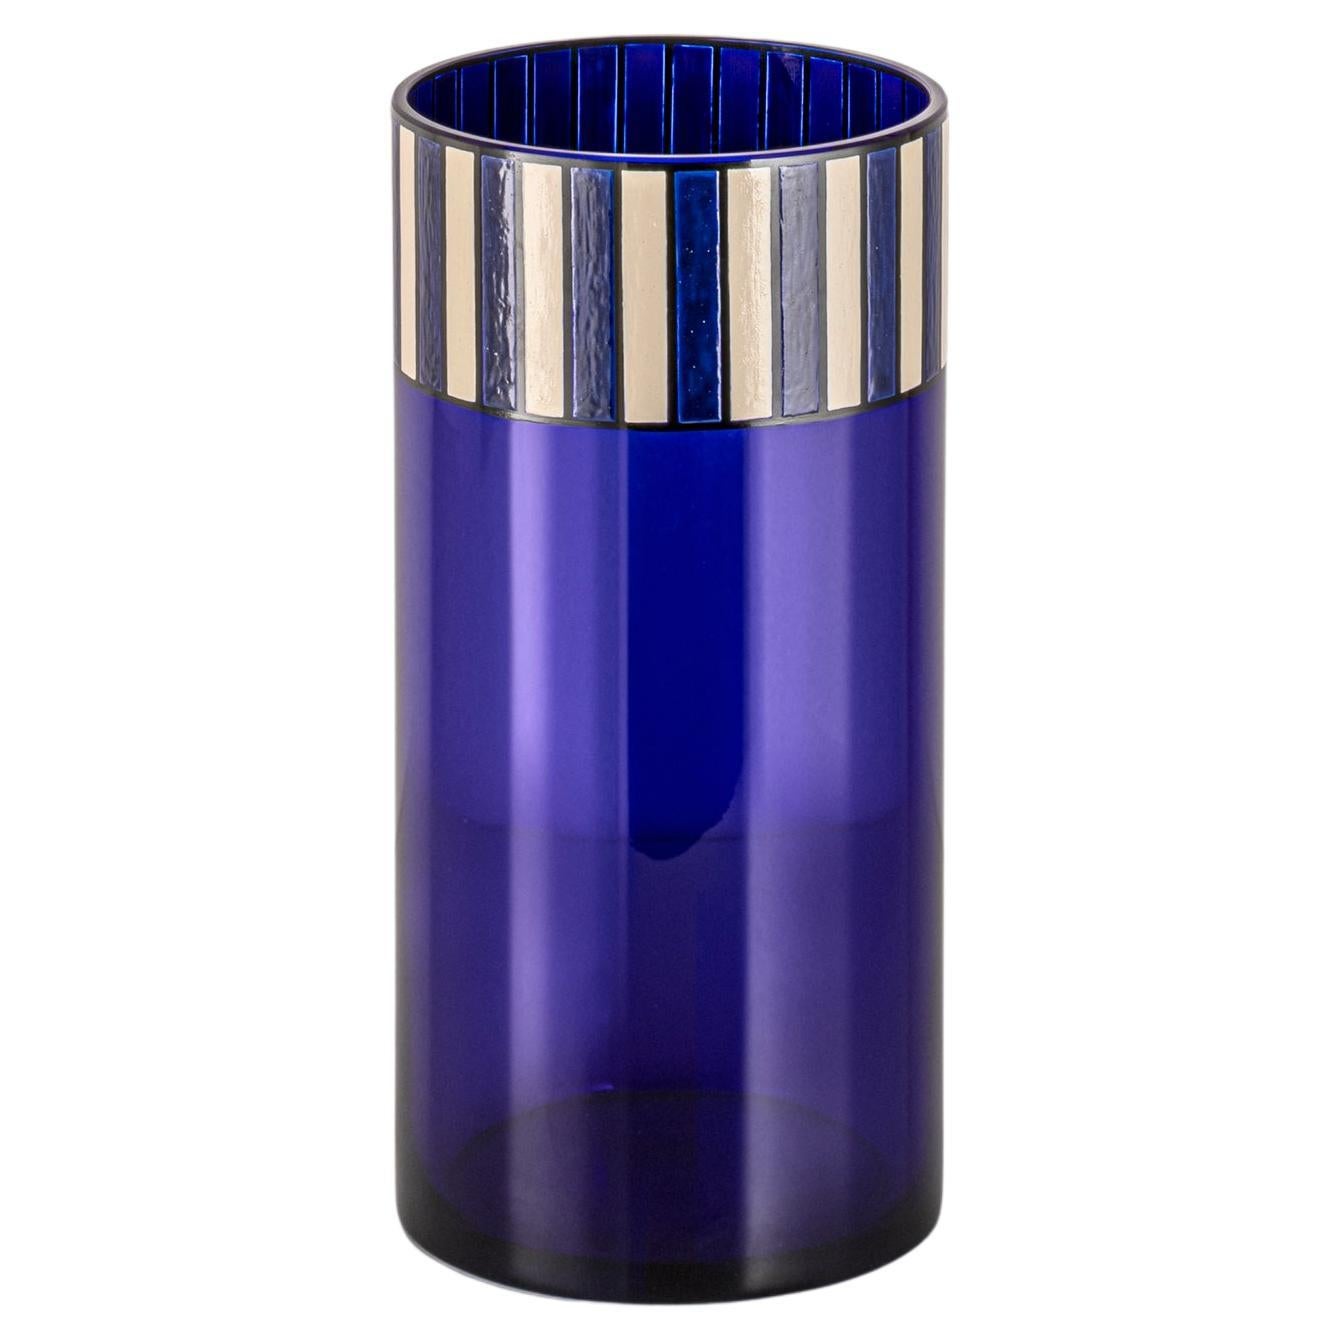 Collection of murano glass and enamel vases, in three colour variants. The particular thickness of the enamel decoration on the surface of the glass is inspired by a French technique in vogue in the 1920s, which can be found in some iconic pieces by